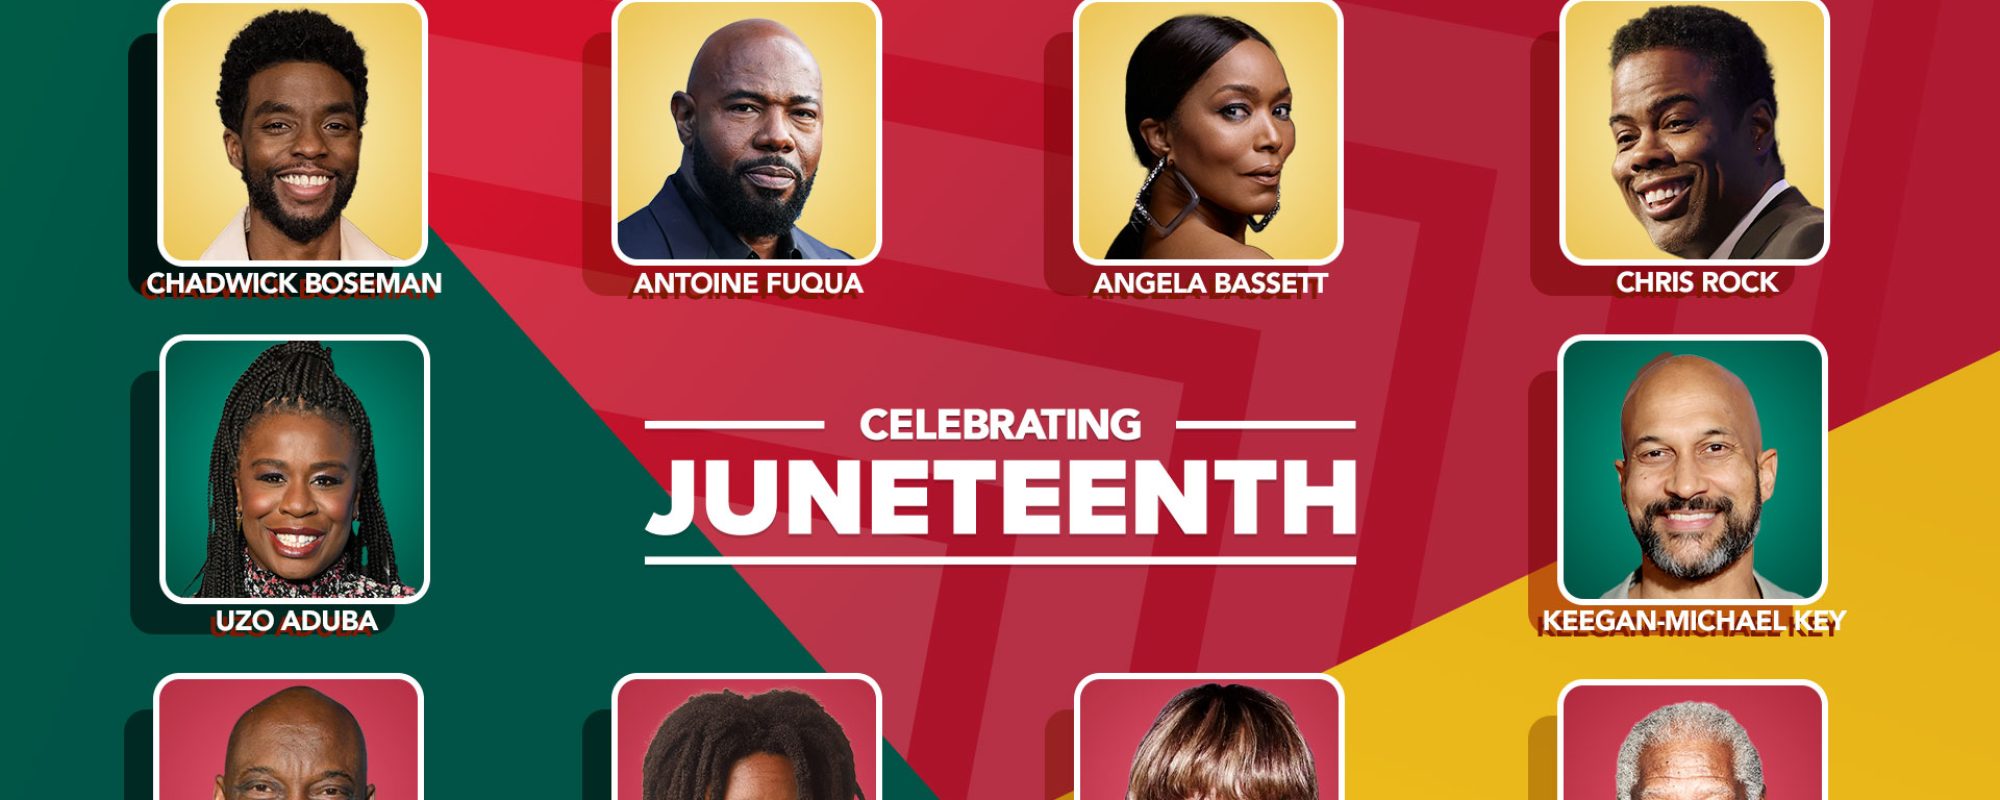 OVATION TV CELEBRATES JUNETEENTH WITH A CURATED ON-DEMAND LINEUP OF SERIES & FILMS ALL MONTH LONG